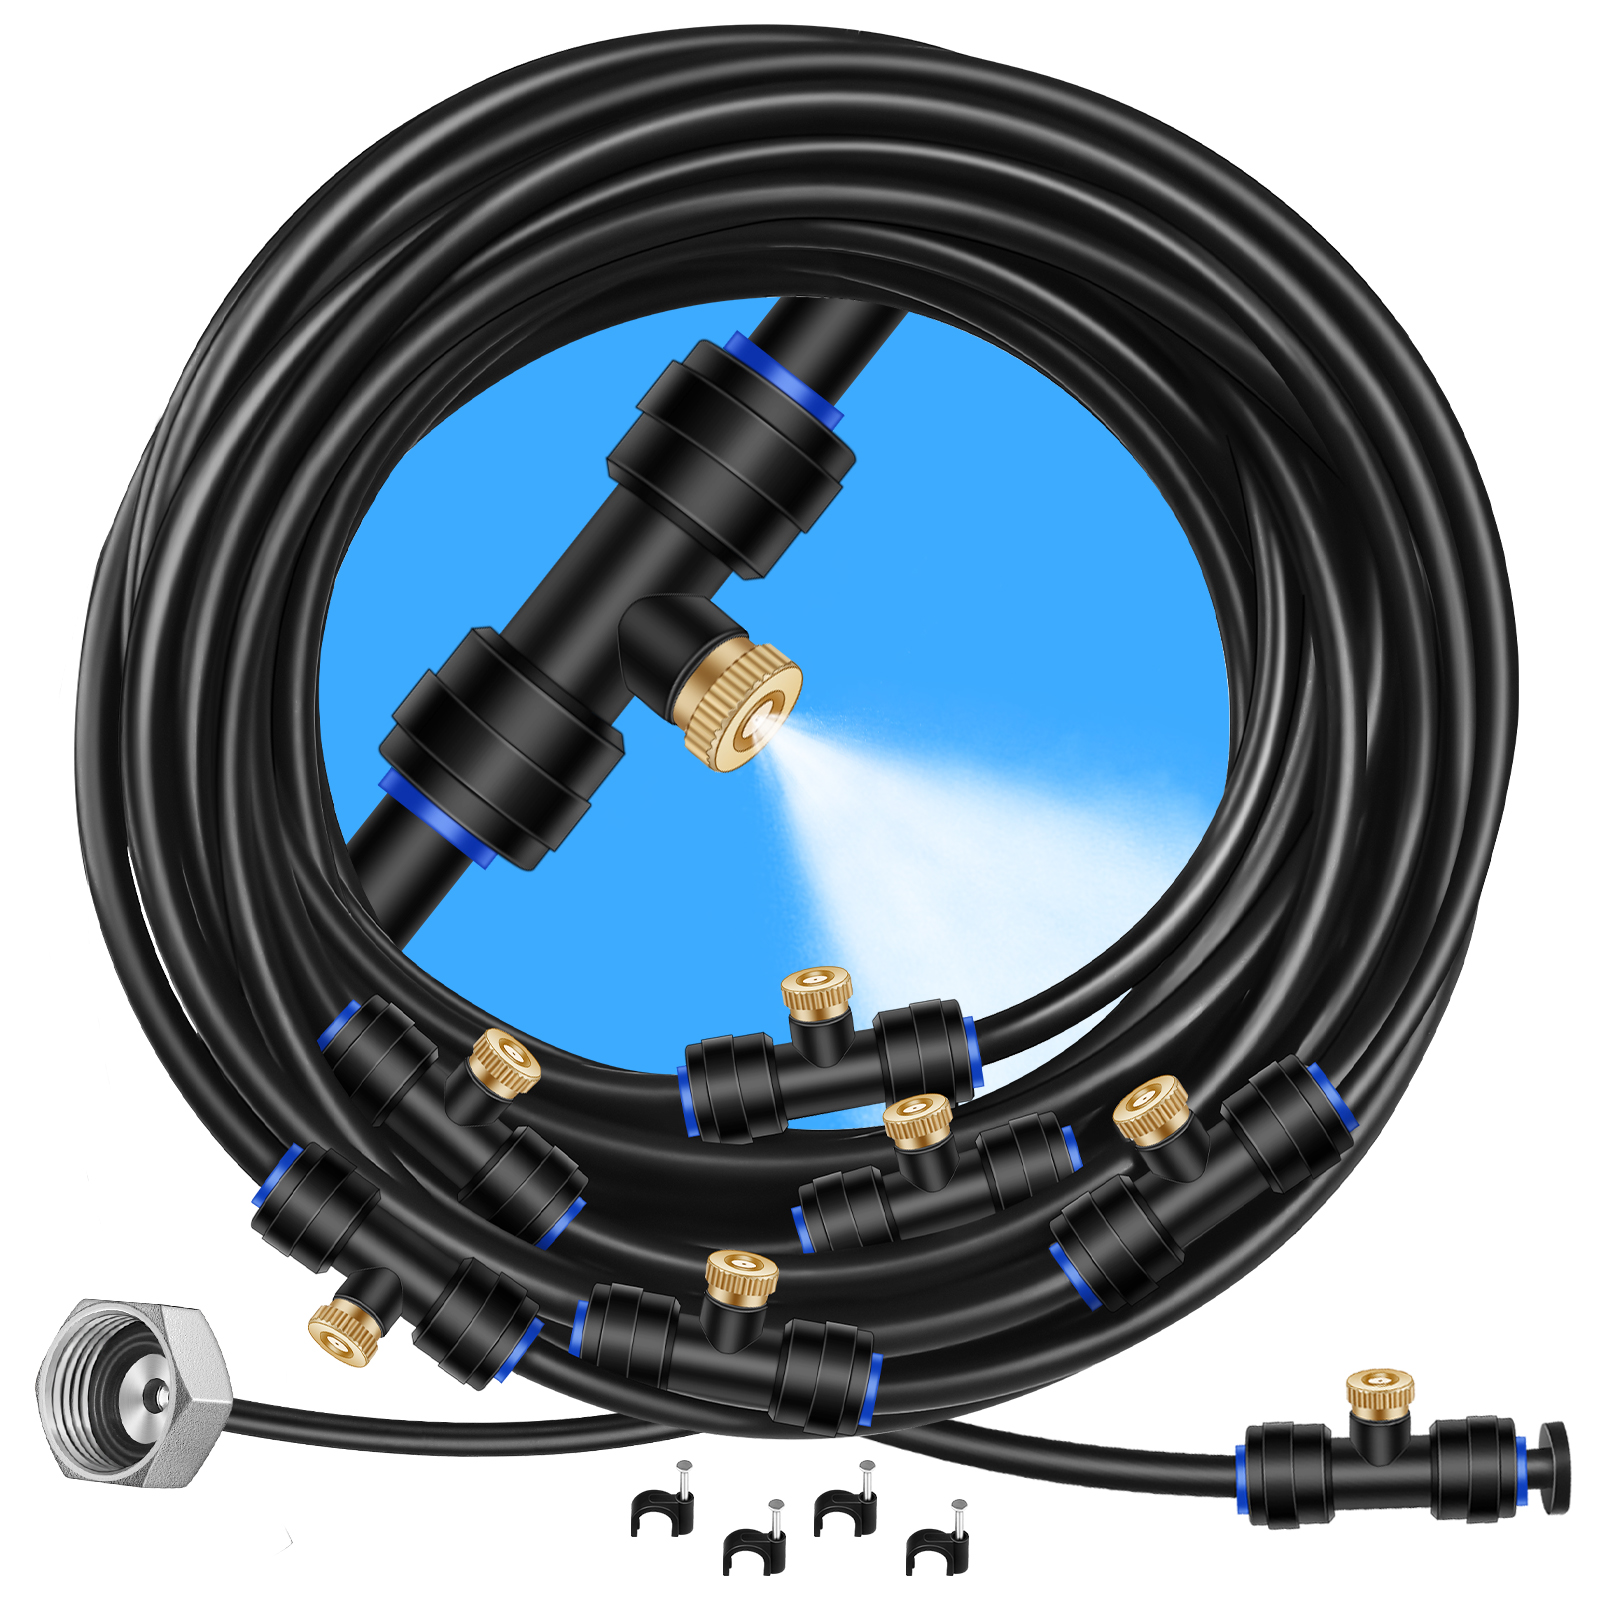 GOXAWEE Misting System, 59FT (18M) Misting Line + 20 Brass Mist Nozzles + Brass Adapter(3/4